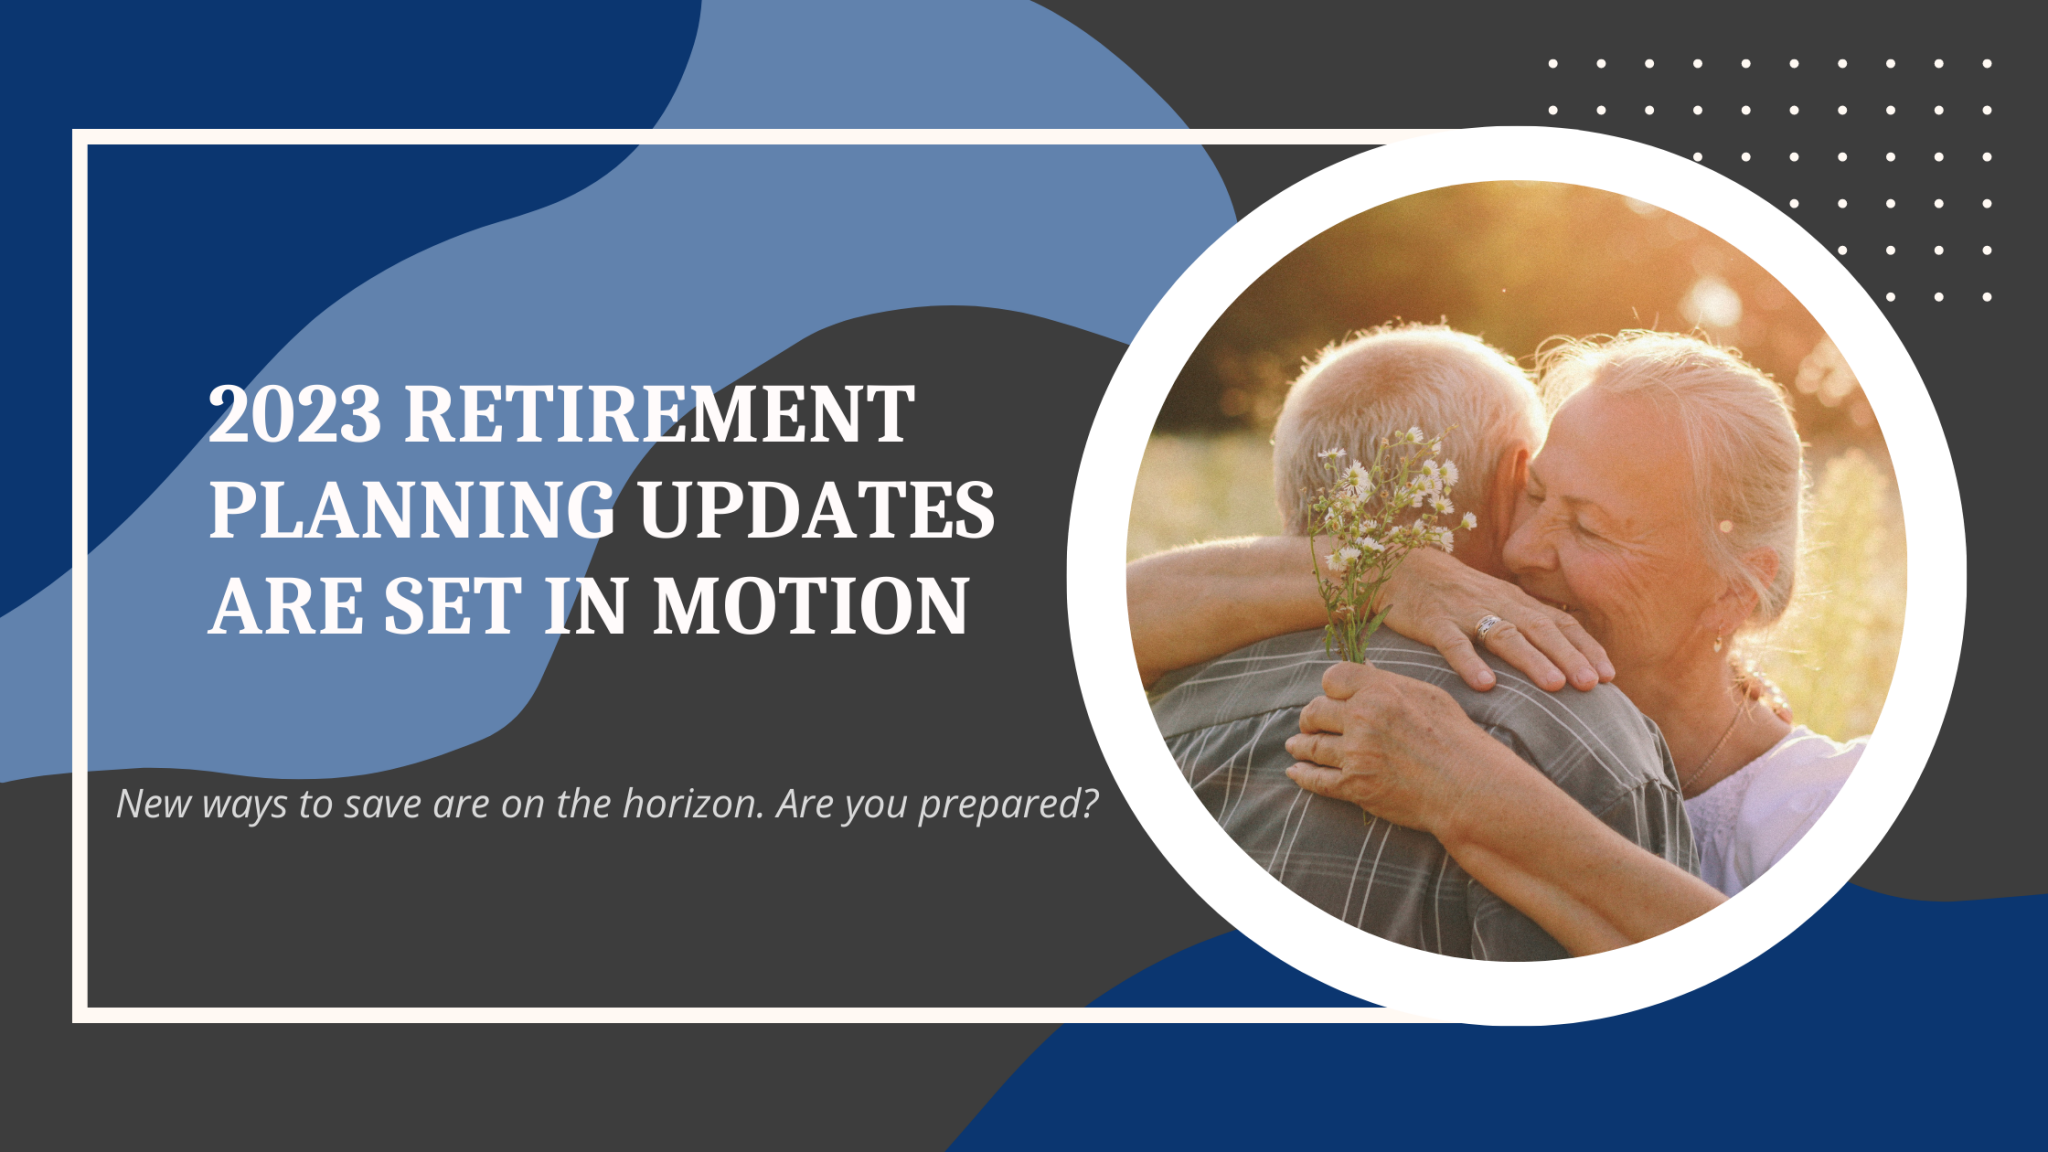 2023 Retirement Planning Updates are Set In Motion